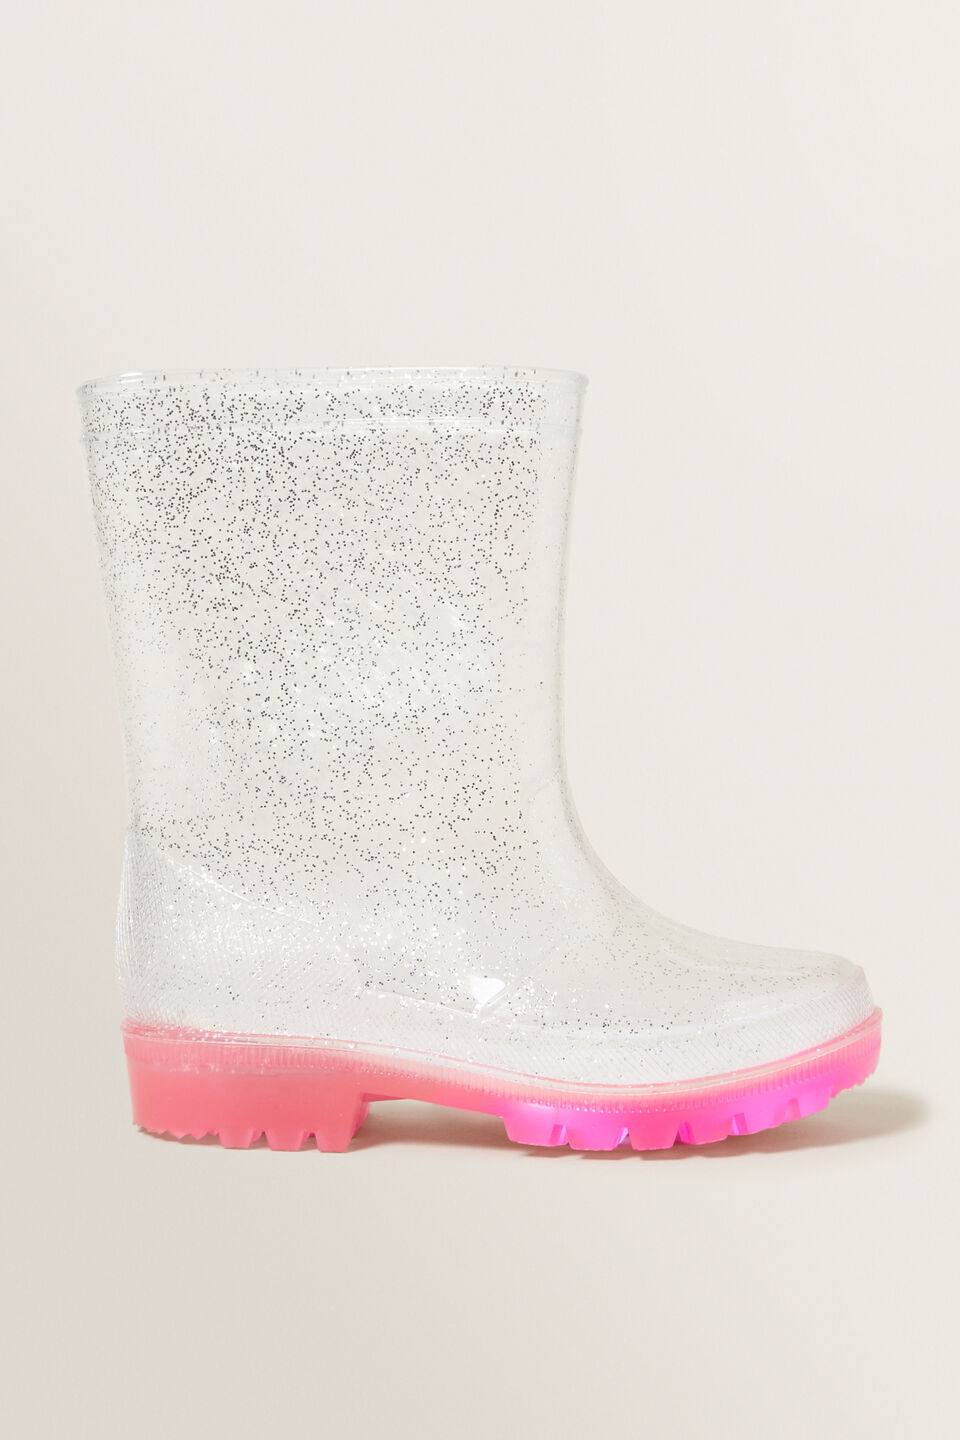 Clear Light Up Gumboots  